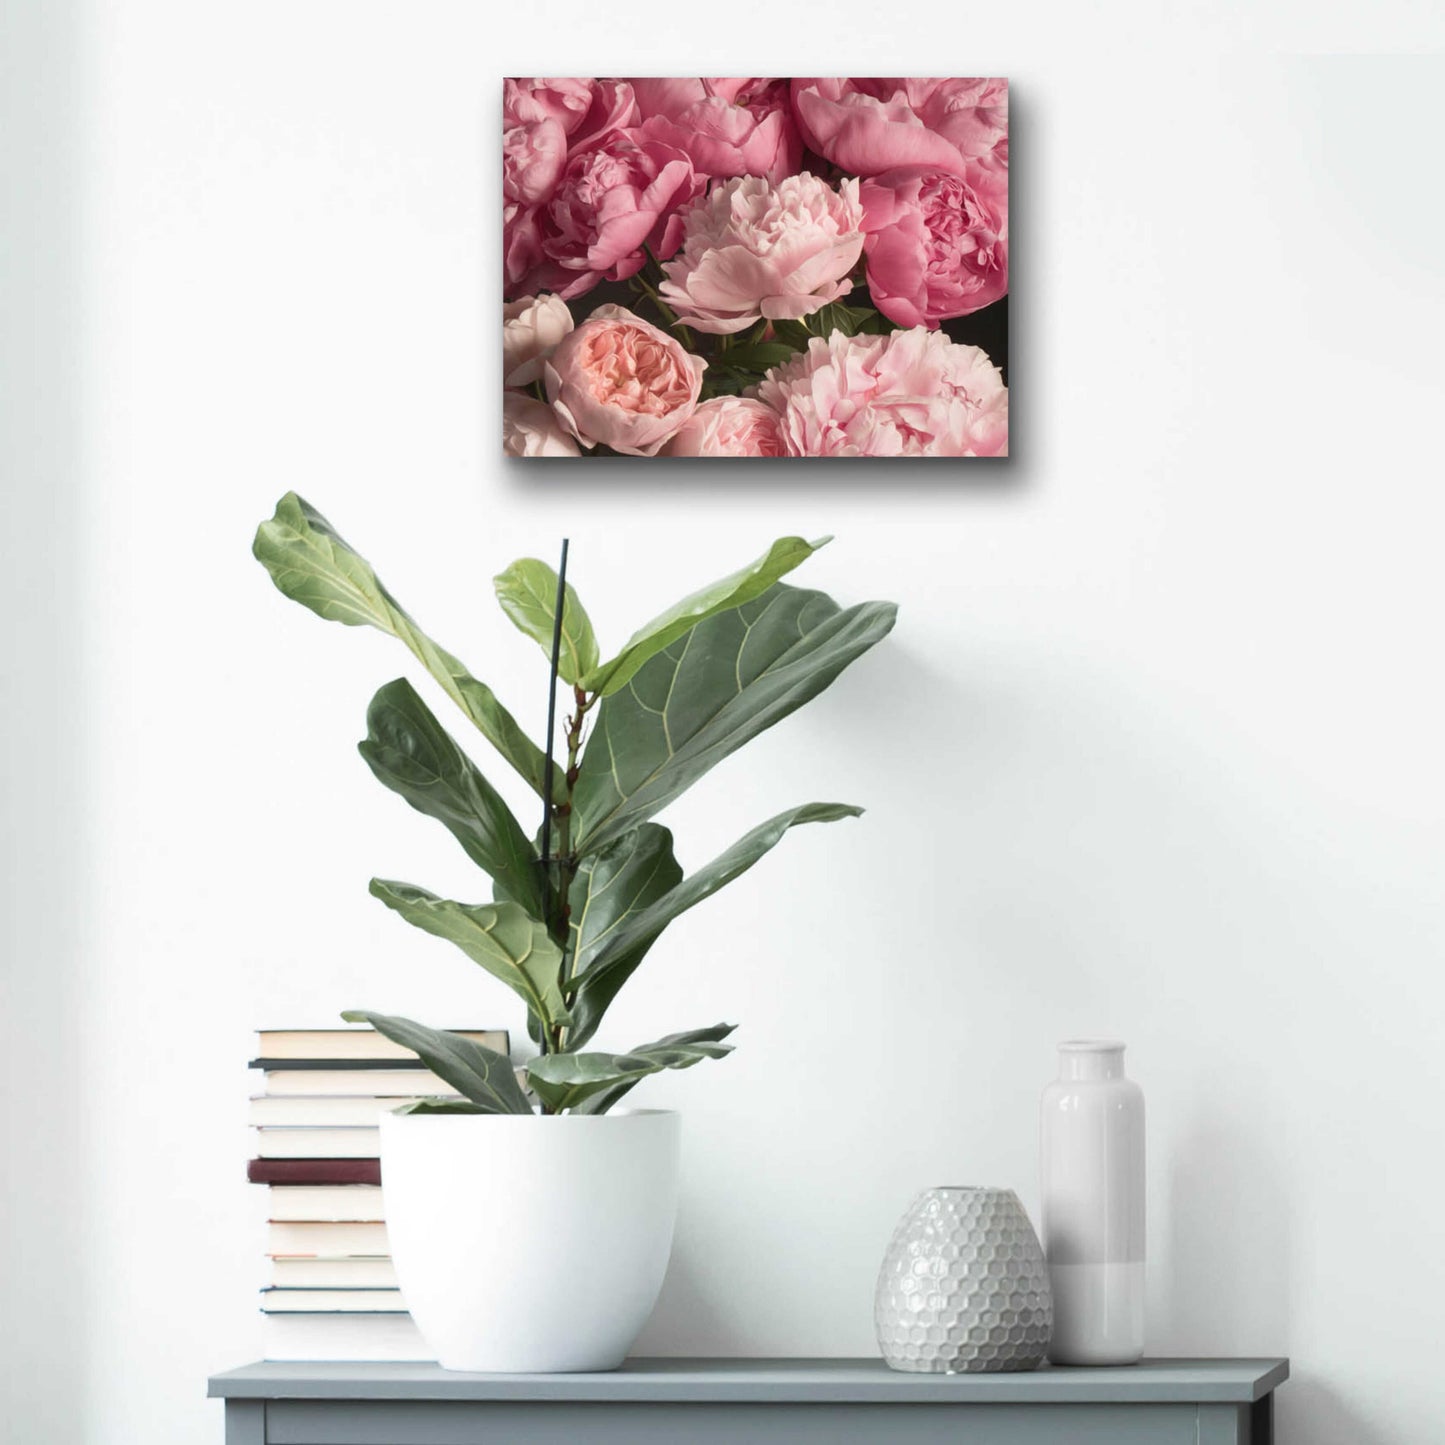 Epic Art 'Pink Petals' by Leah McLean, Acrylic Glass Wall Art,16x12